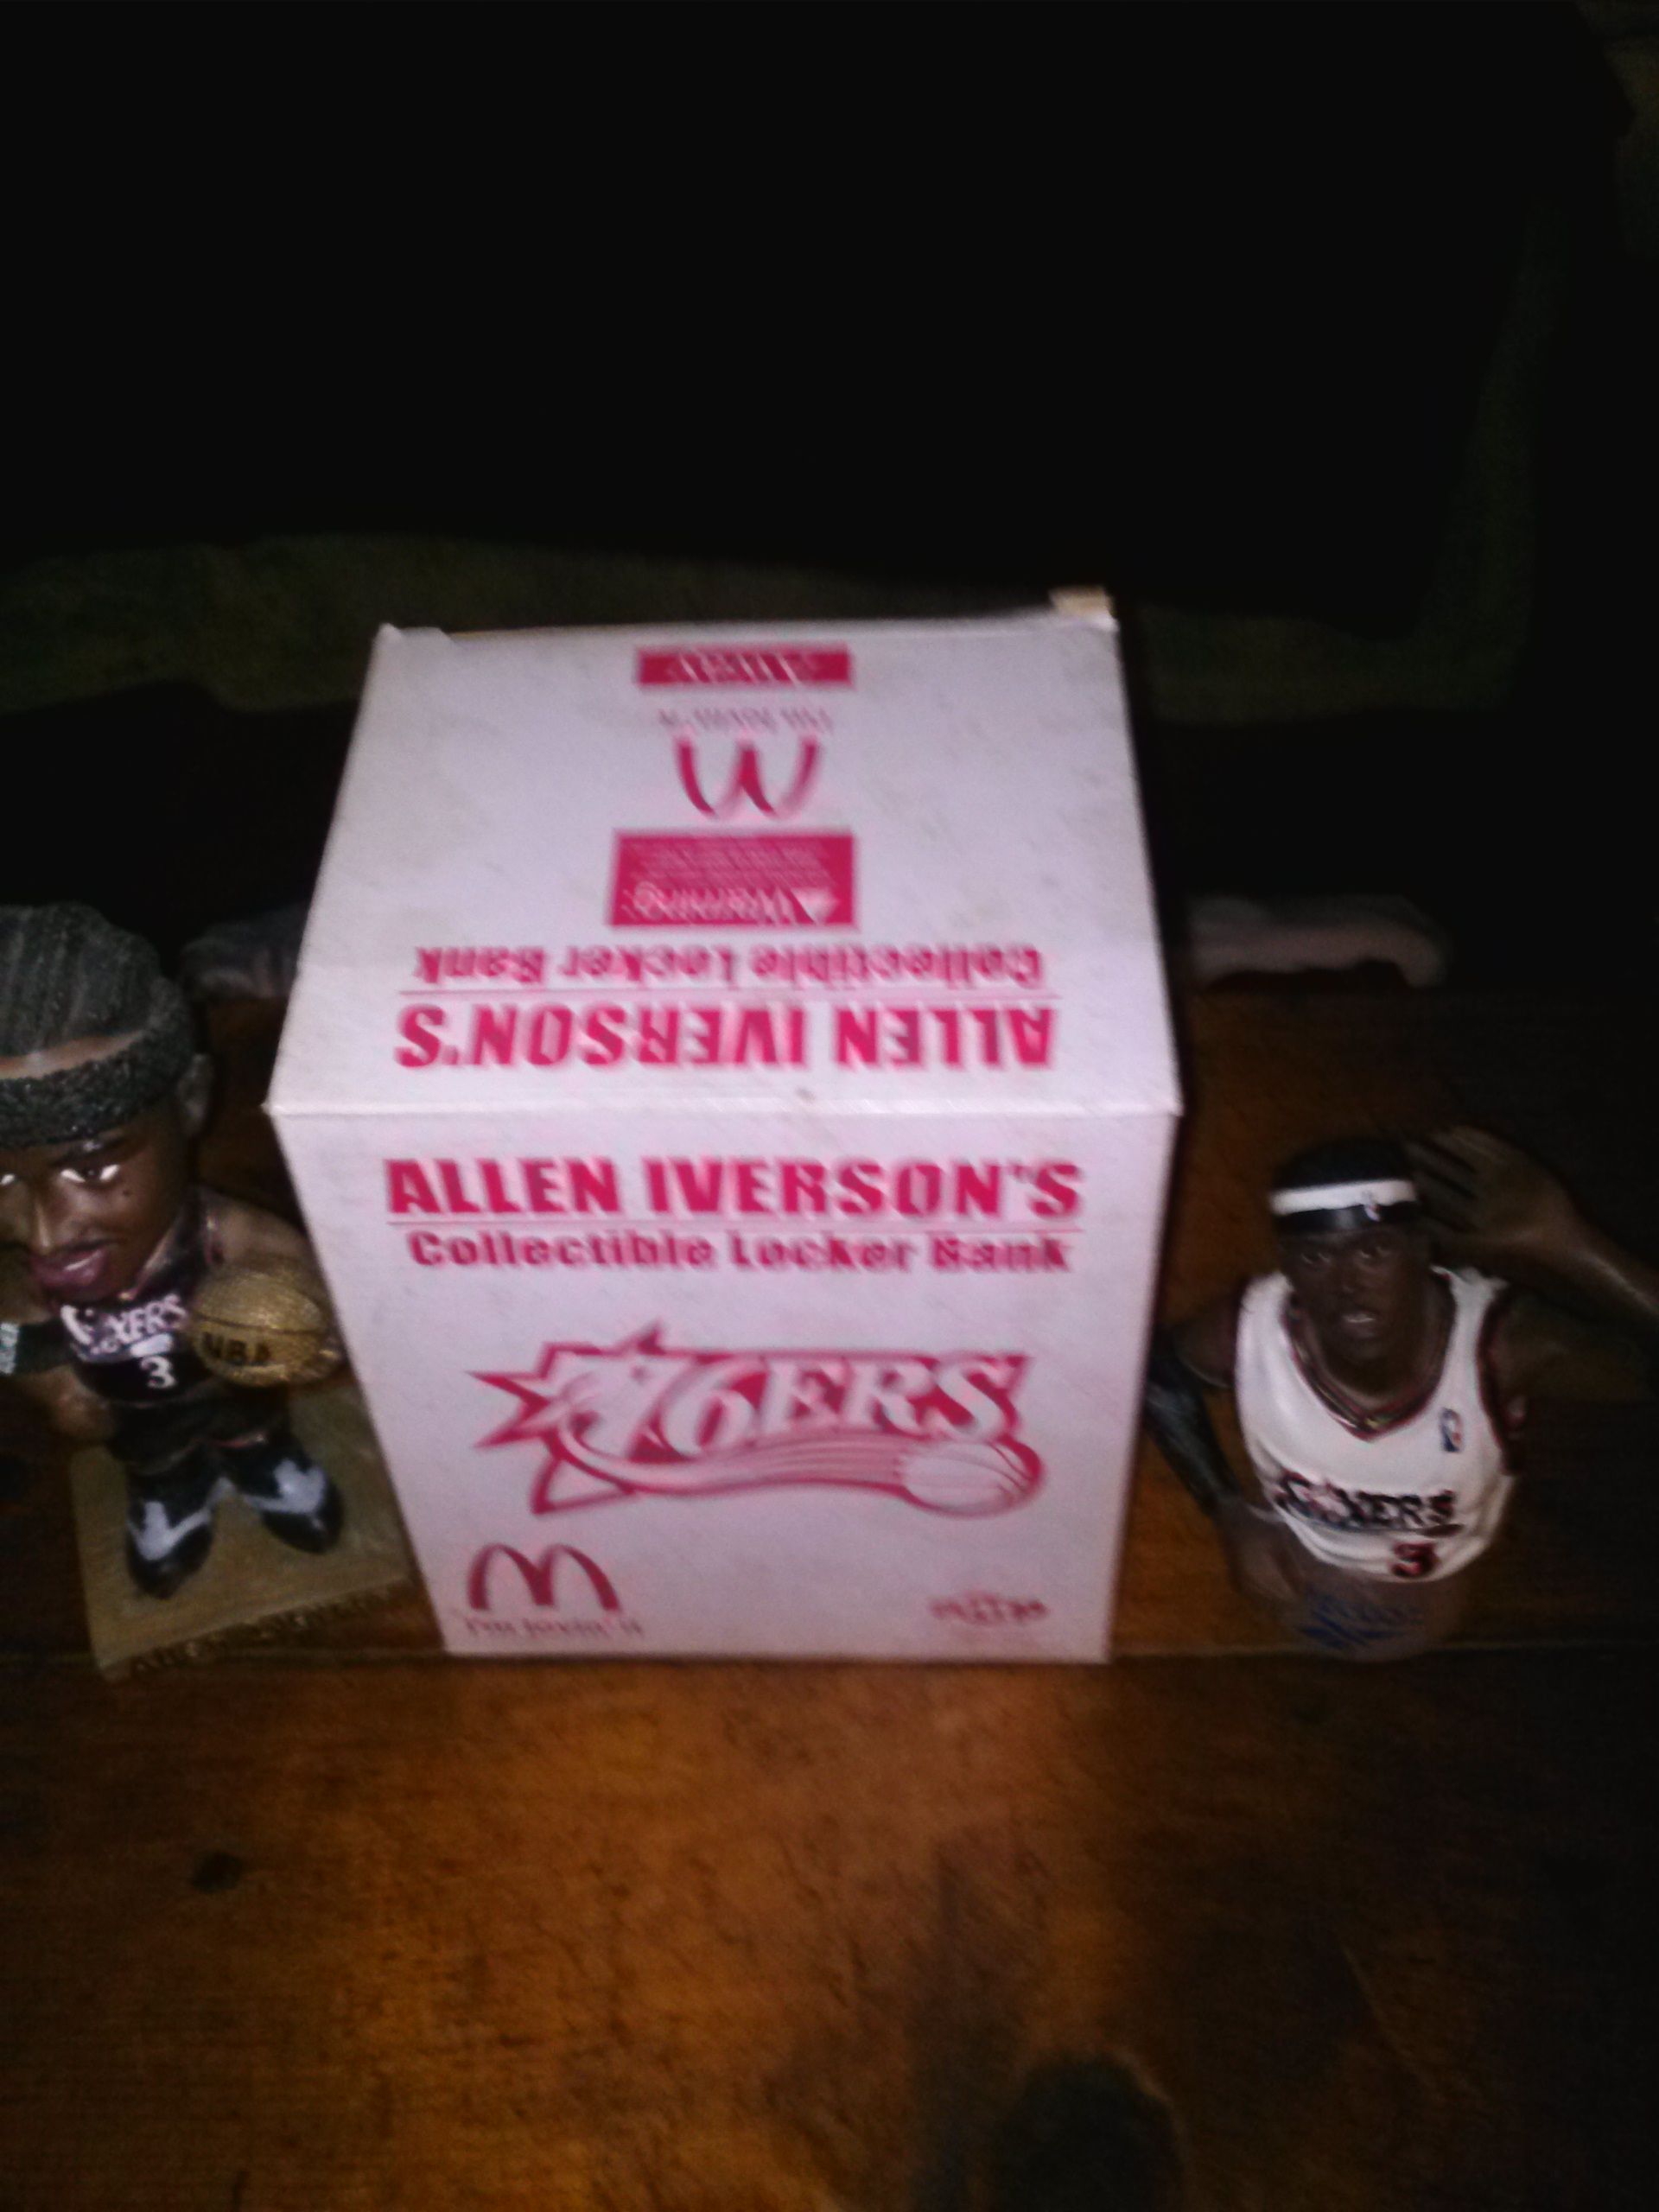 Allen Iverson collectibles just bobblehead, and statue bust of Iverson